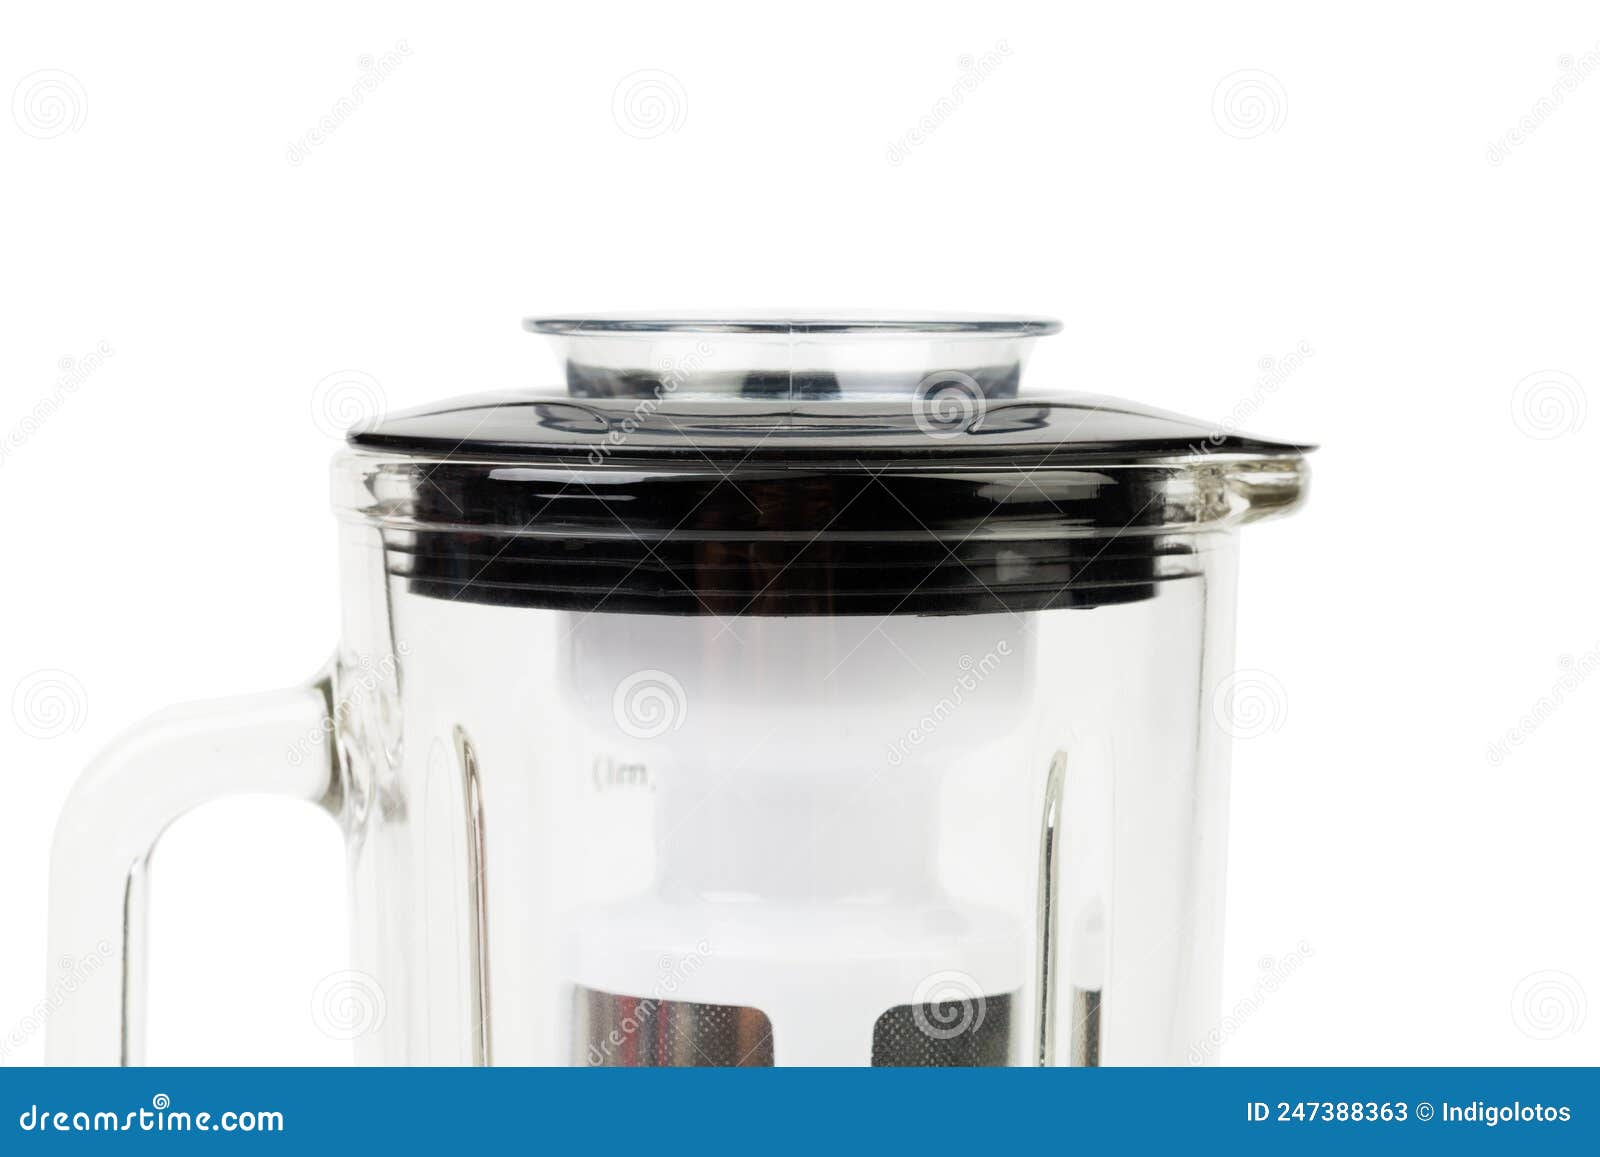 200+ Close Up Of Electrical Blender Kitchen Equipment Isolated On